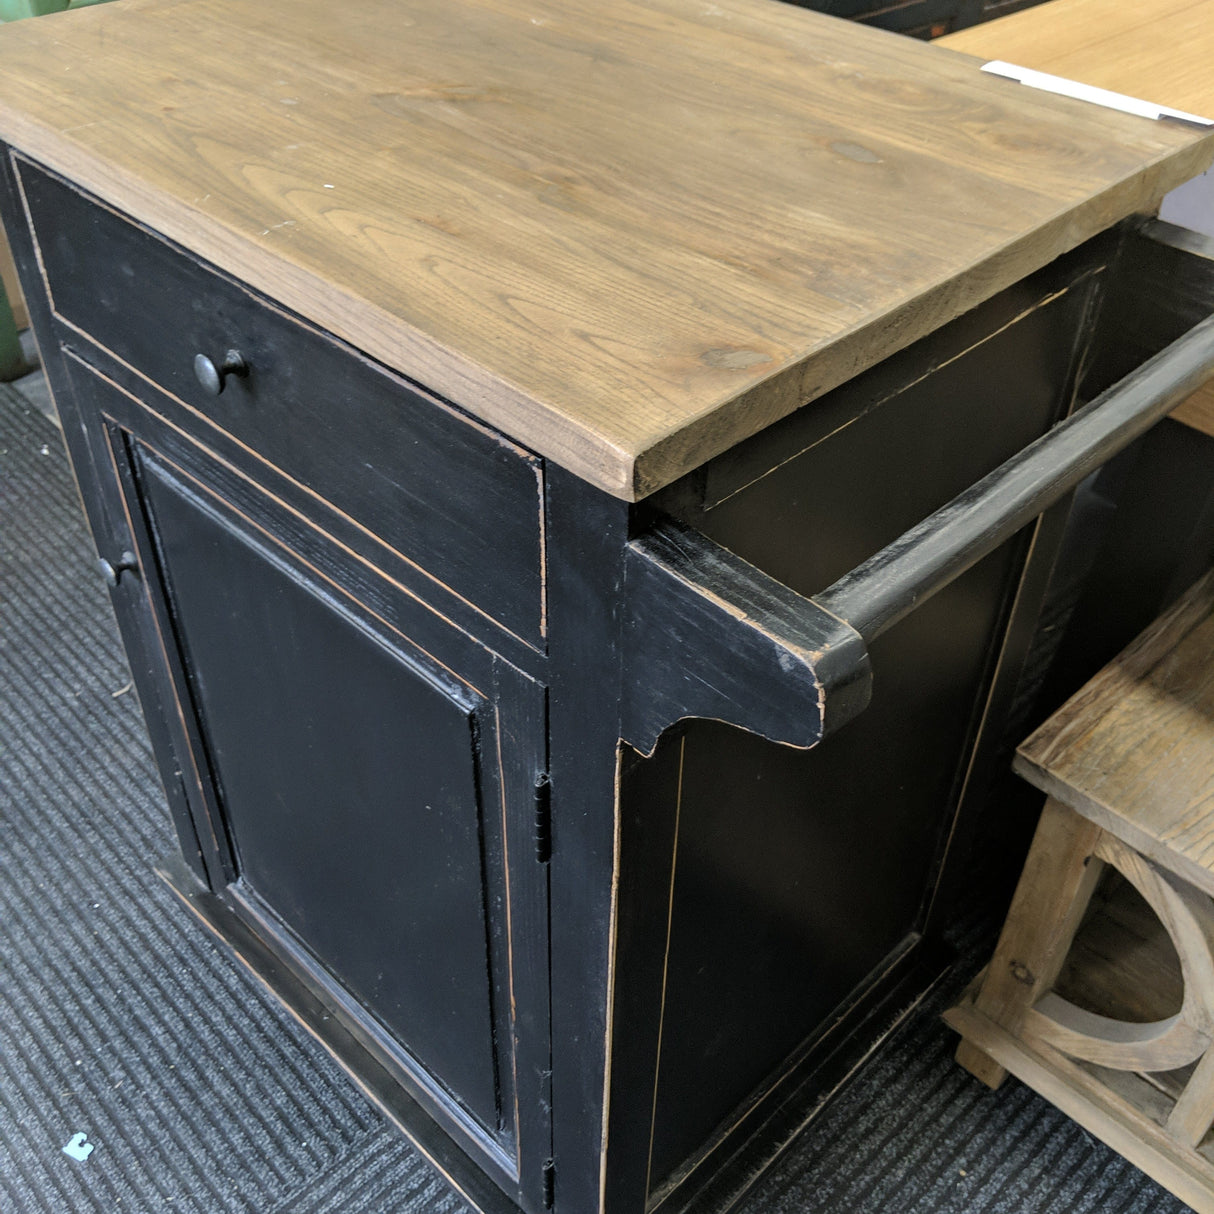 Recycled Wood Rustic Kitchen Cabinet